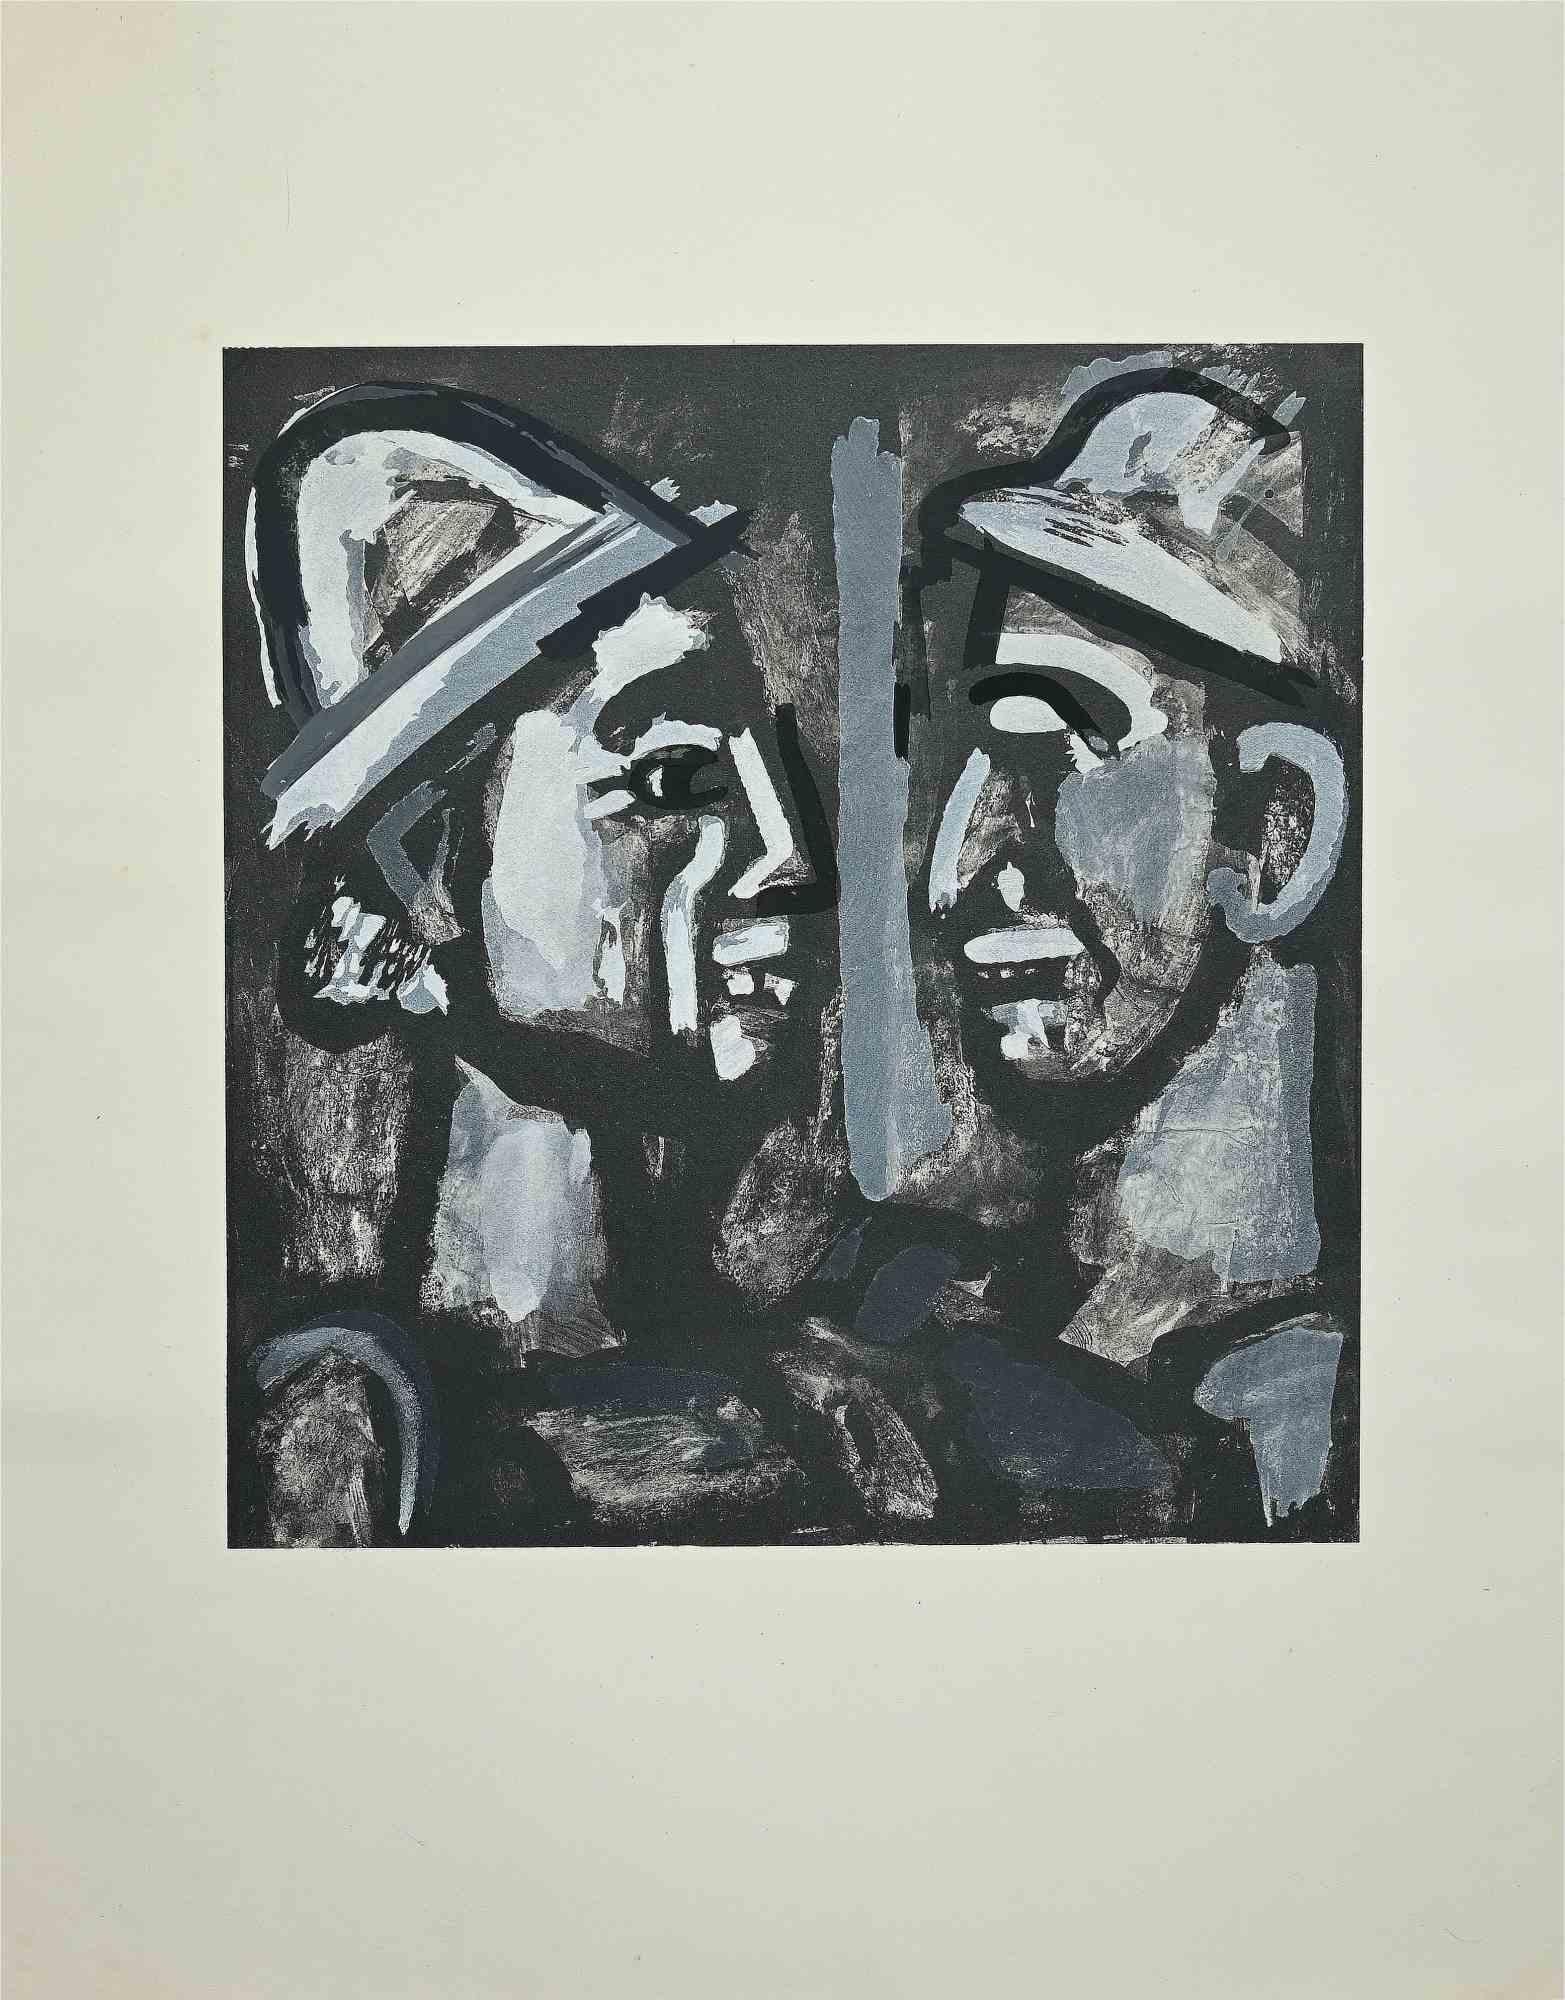 Unknown Abstract Drawing – Face - Fototyp-Reproduktion des Tempera-Gemäldes von Rouault - 1933